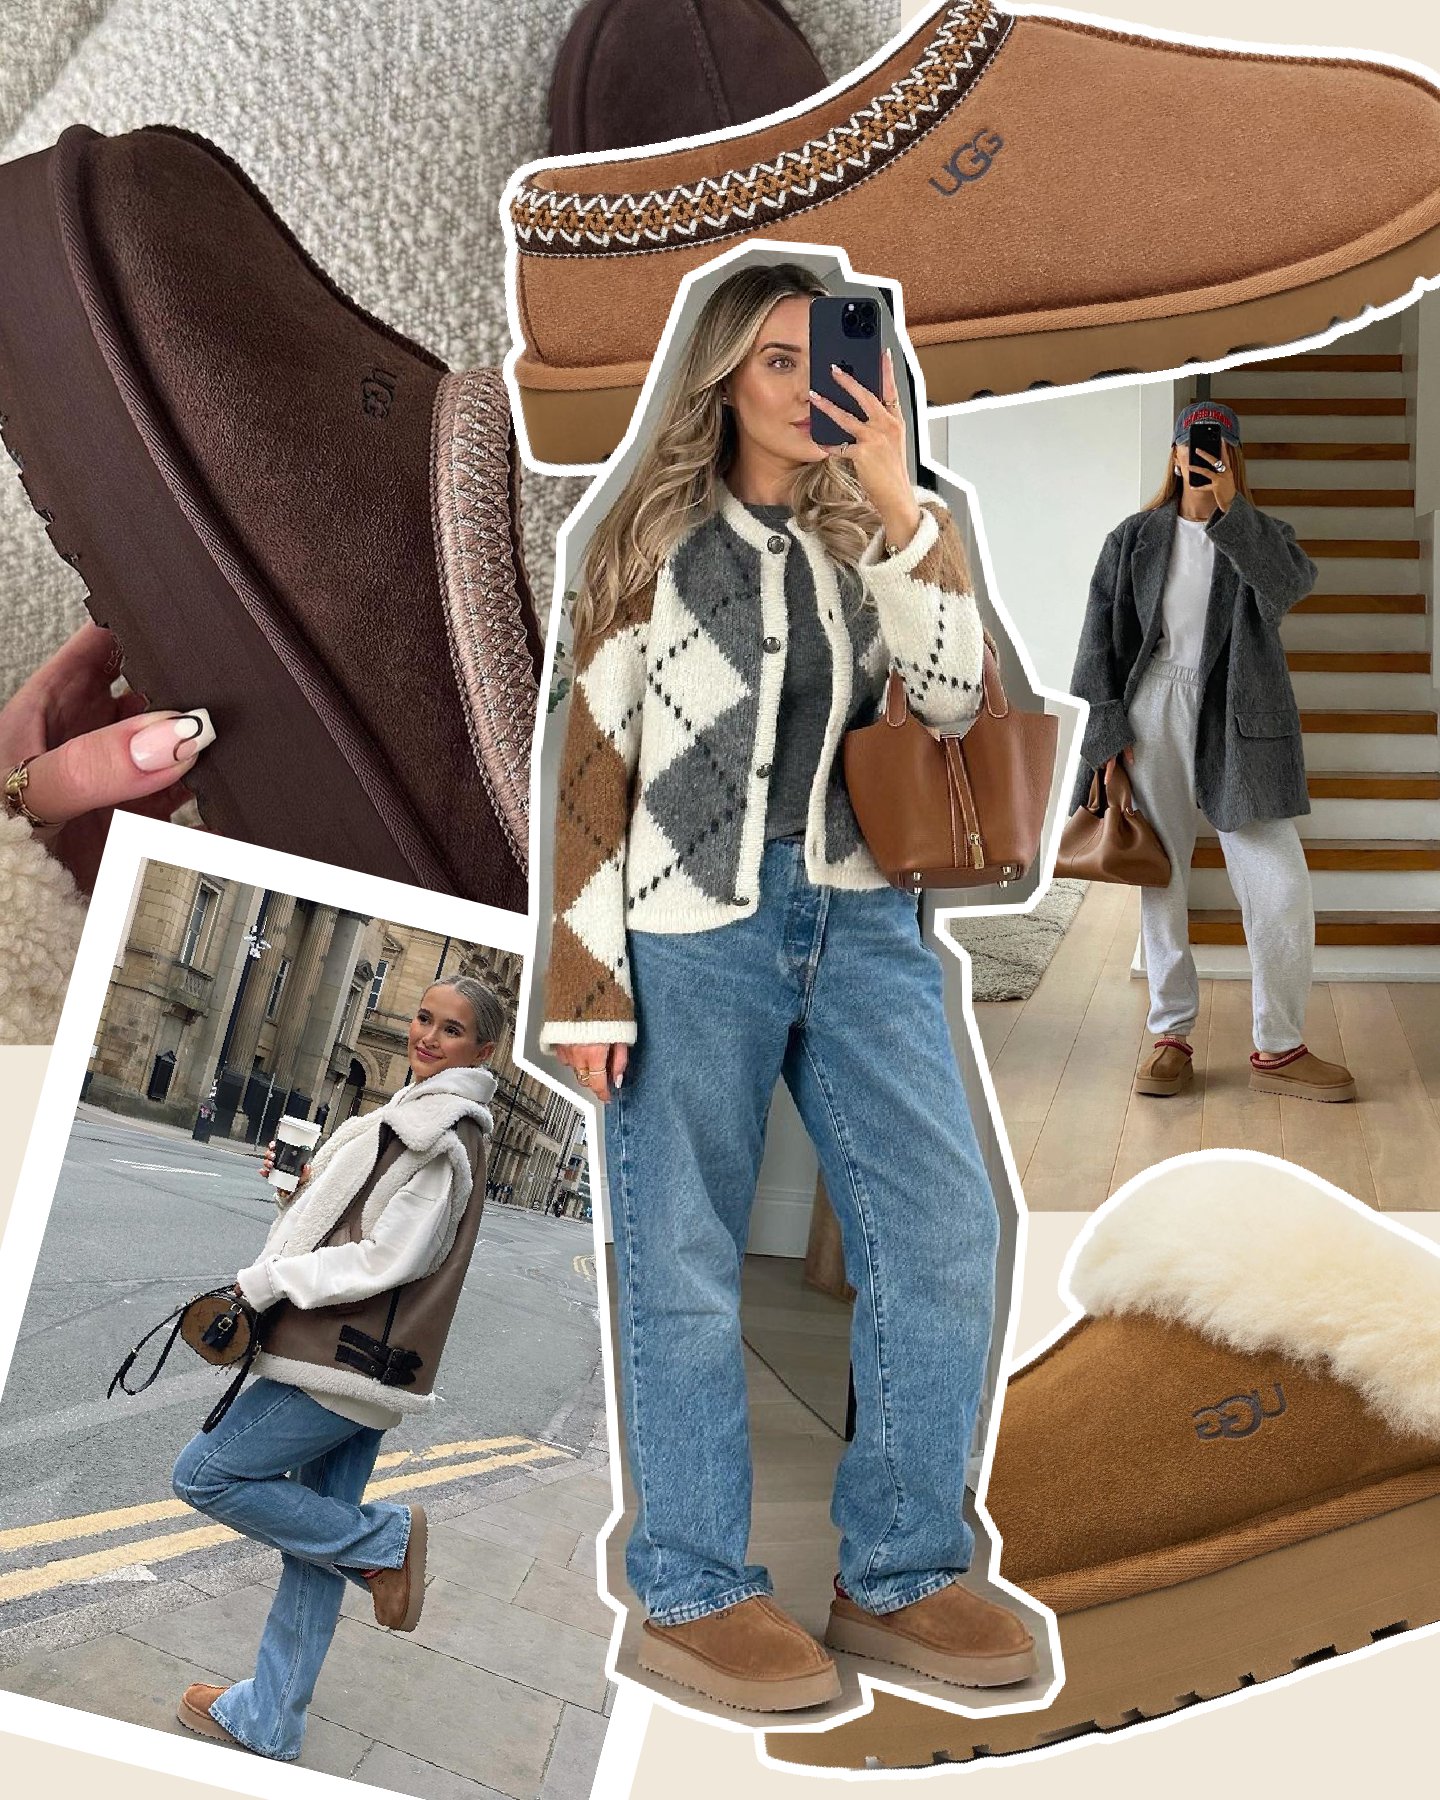 Ugg Slippers Outfits  Casual fall outfits, Slipper outfit, Outfit inspo  fall